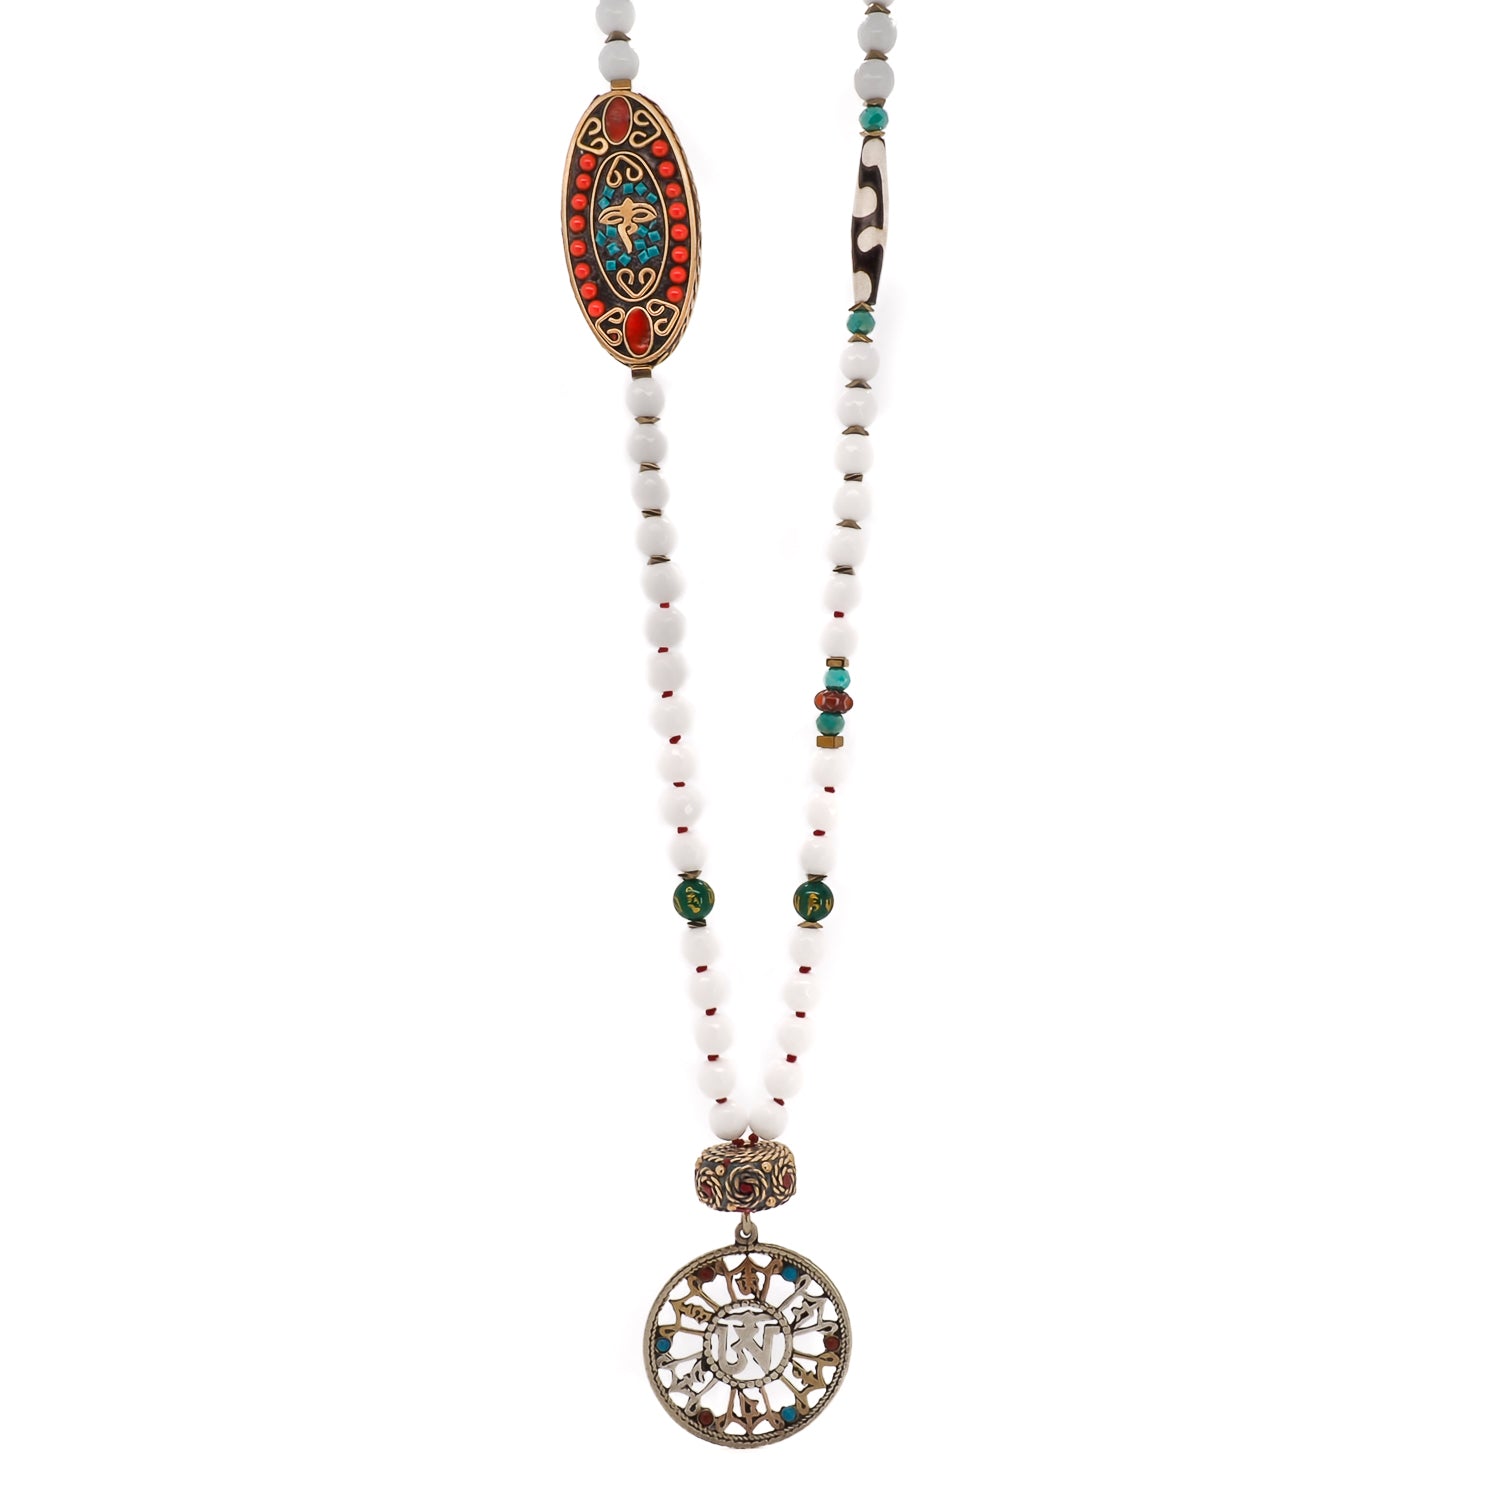 Eye Of The Buddha Talisman Necklace - Handmade jewelry featuring the sacred Om Mani Padme Hum mantra and the all-seeing wisdom of the Buddha Eye.